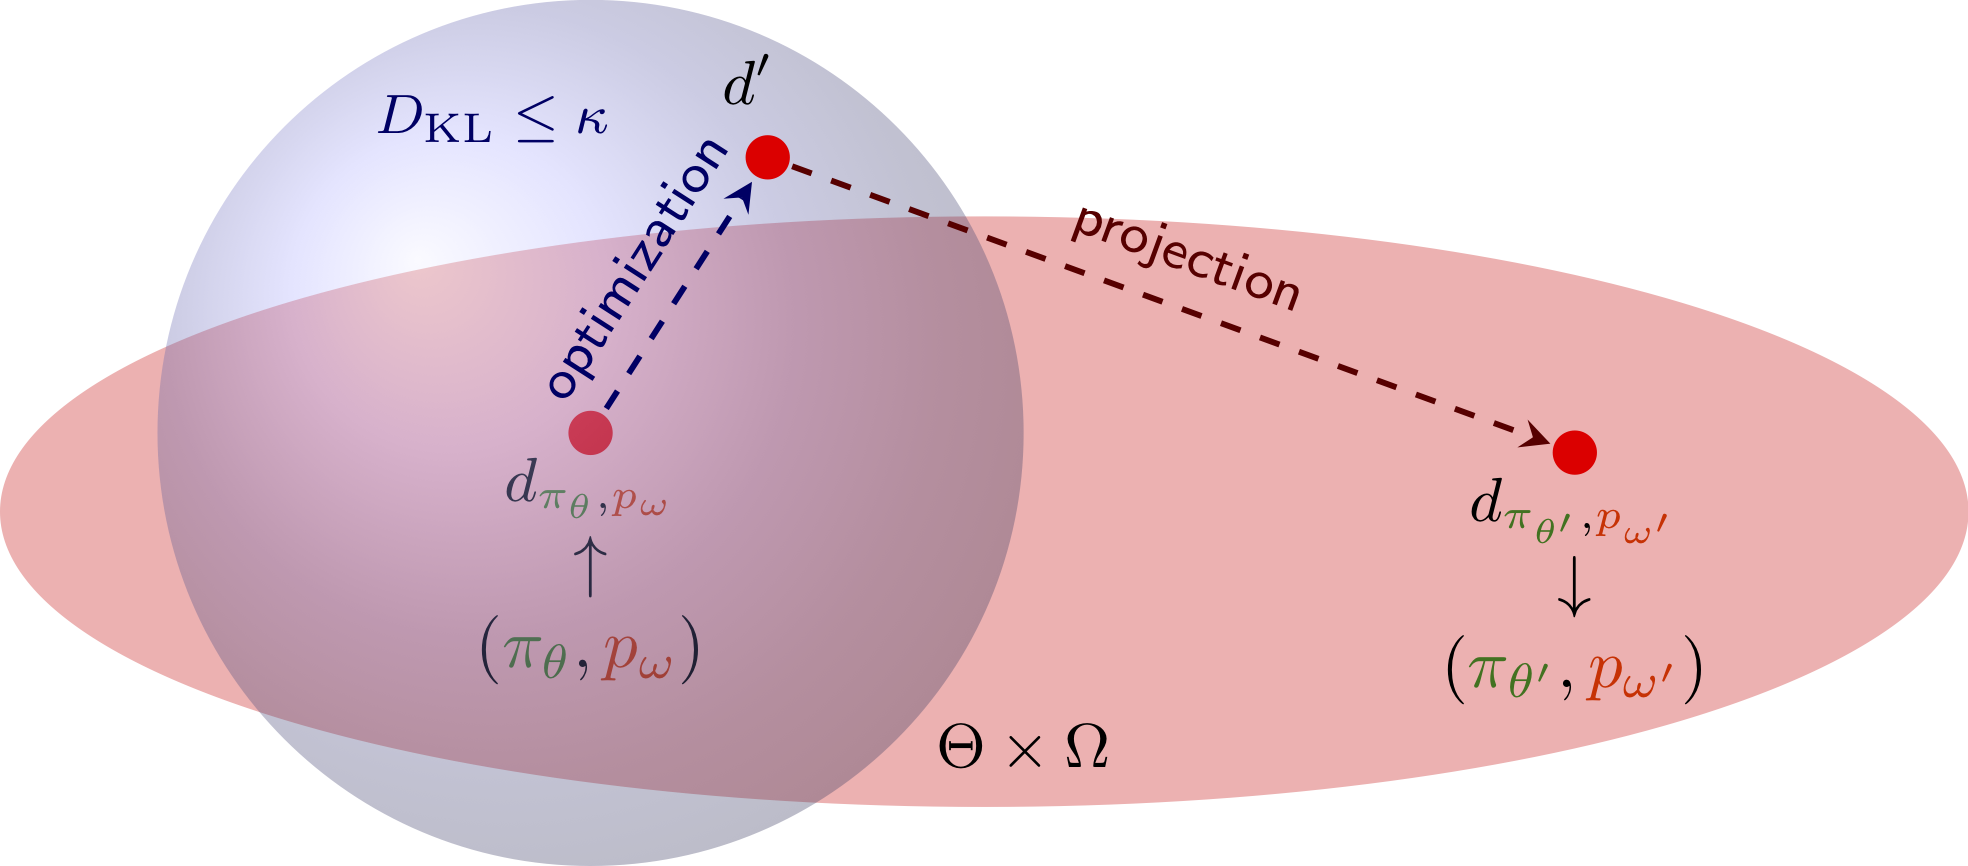 Figure 2 - Optimization and Projection